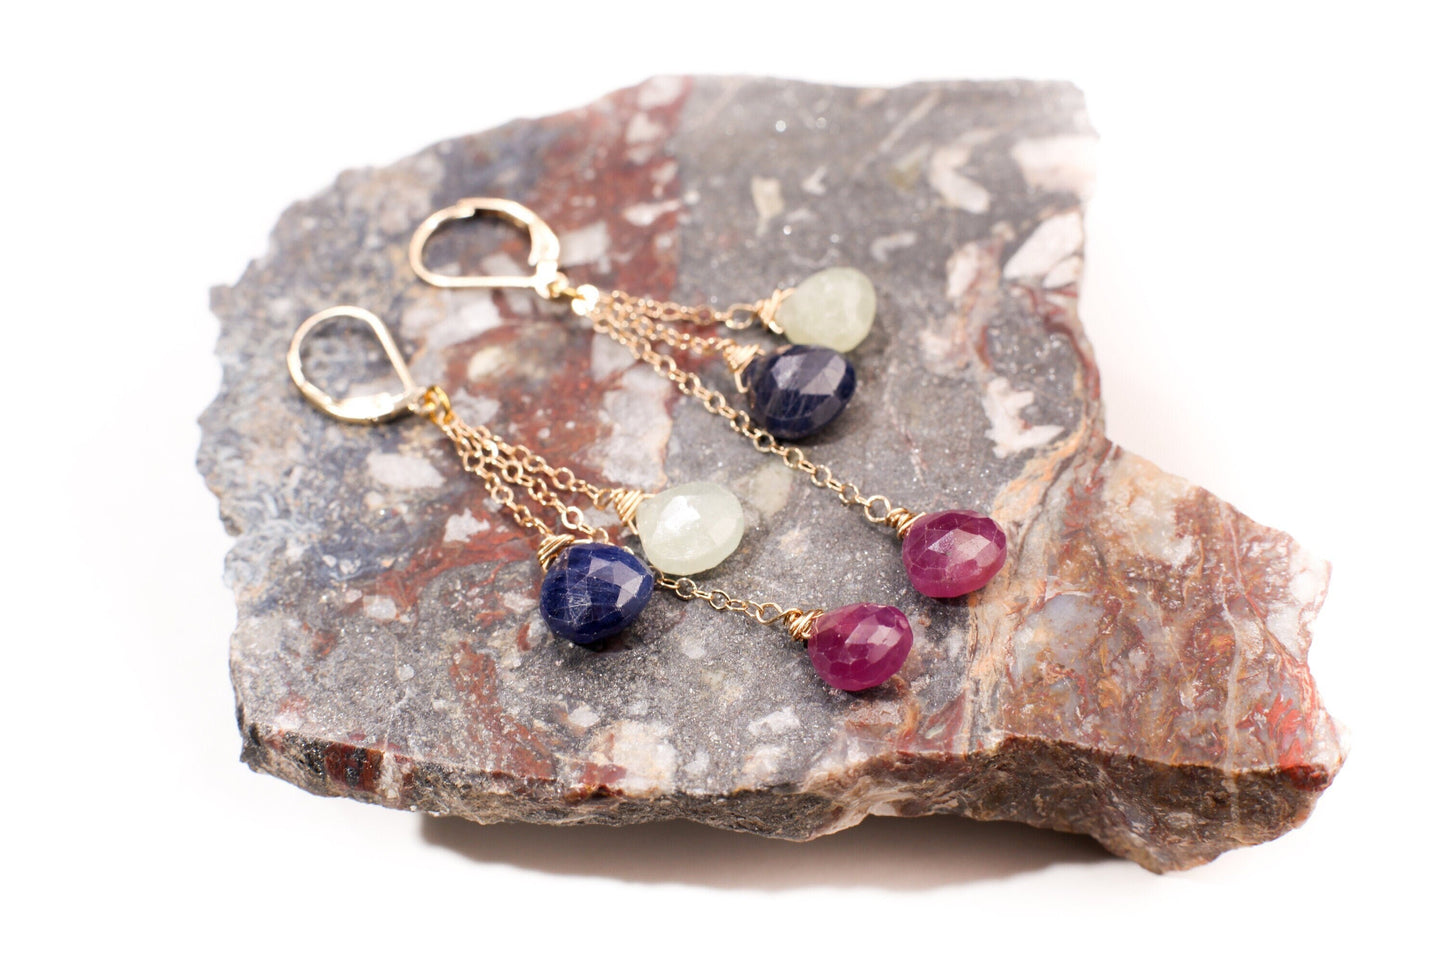 Natural Multi Sapphire Dangling Wire Wrapped Teardrop Briolette Gemstone Earring 925 Sterling Silver Chain & Earwire,Also in 14K Gold Filled